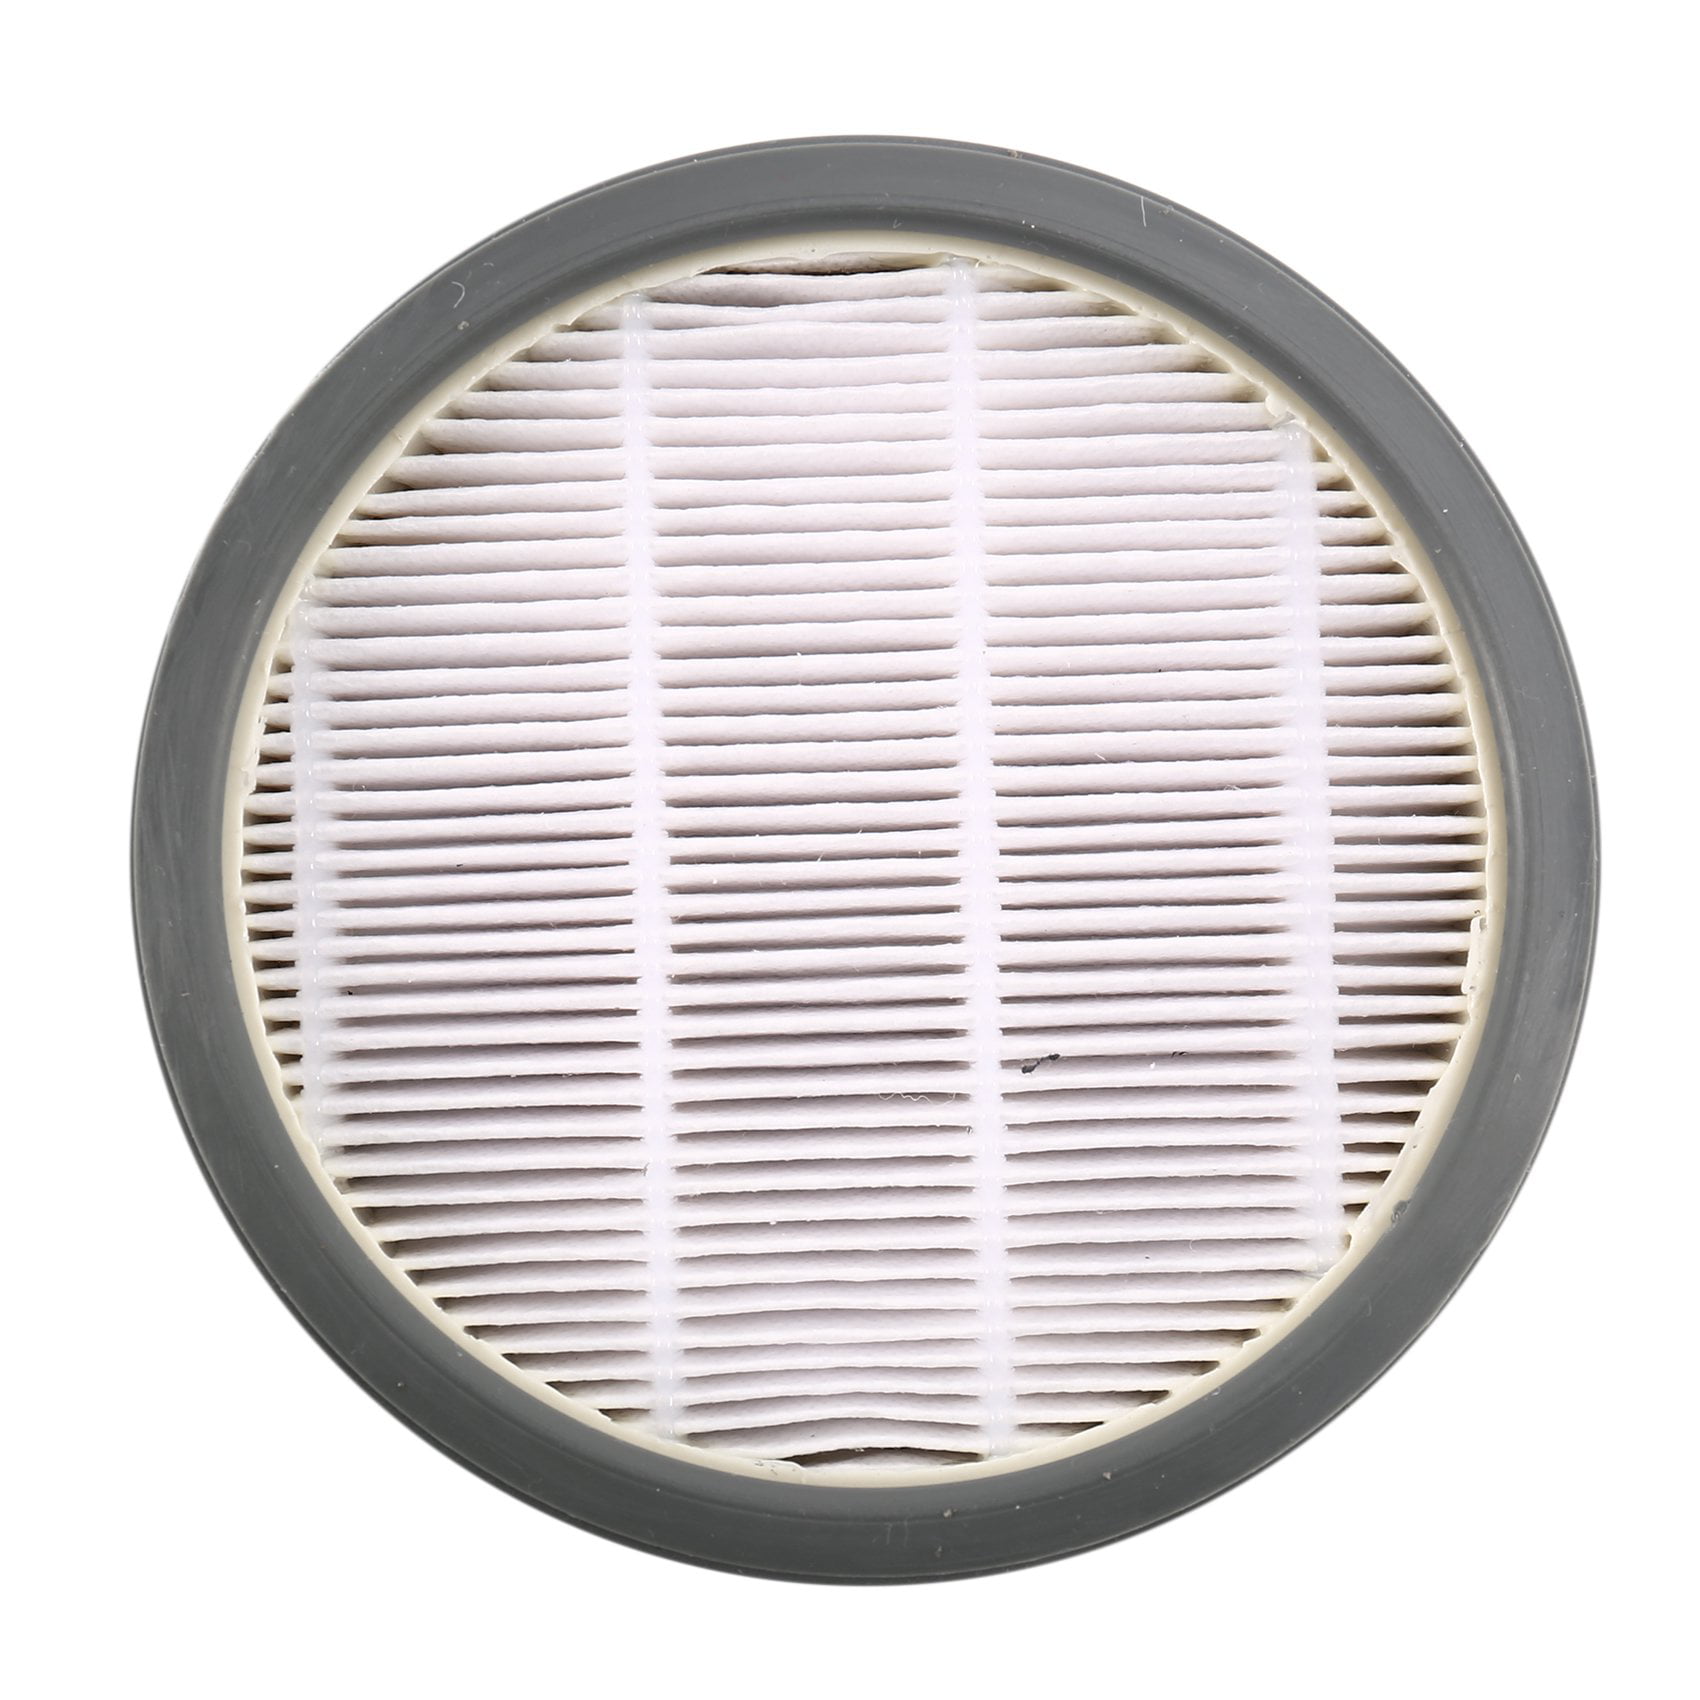 Motor Protection Exhaust Filter For Rowenta Swift Power Cyclonic Vacuum  Cleaner Electric Toothbrush Head Storage Part 230710 From Deng10, $11.33